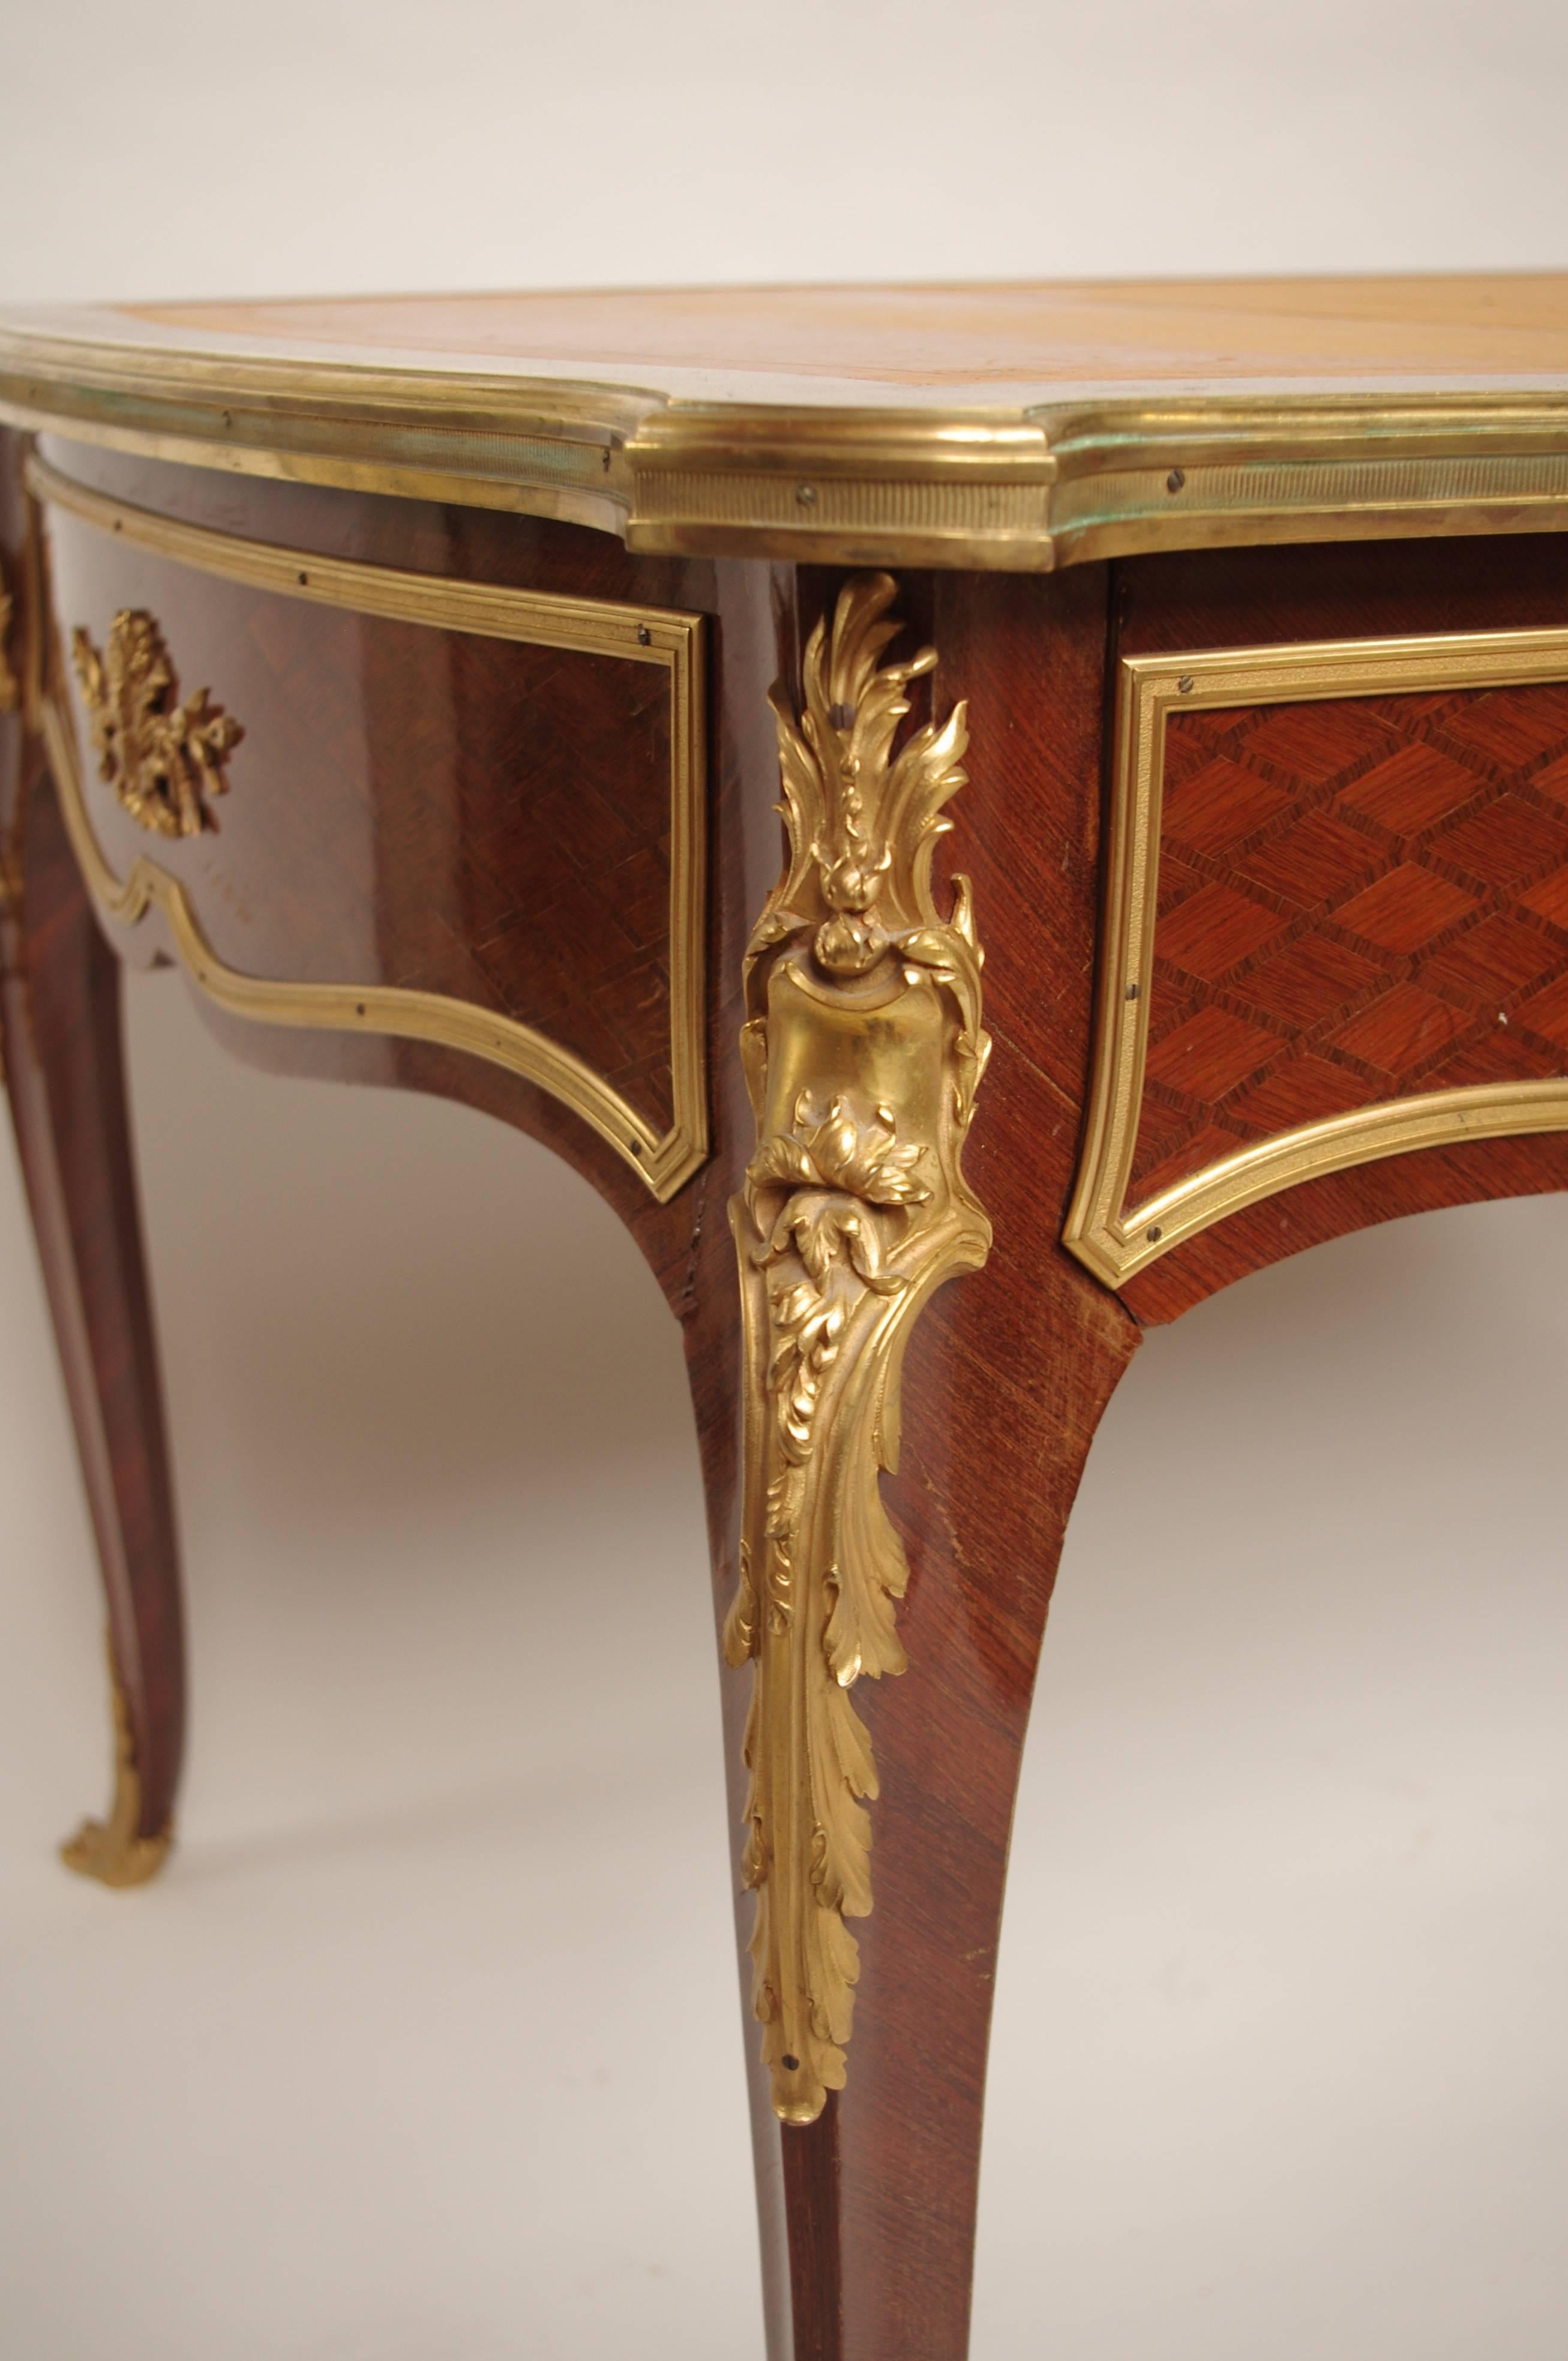 Opening on three drawers.
Gilt and chiseled bronze such as handles, clogs, angles mounted with foliage, ingot mould.
On cabriole legs with scrolled sabots.
Stamped Linke,
circa 1860.